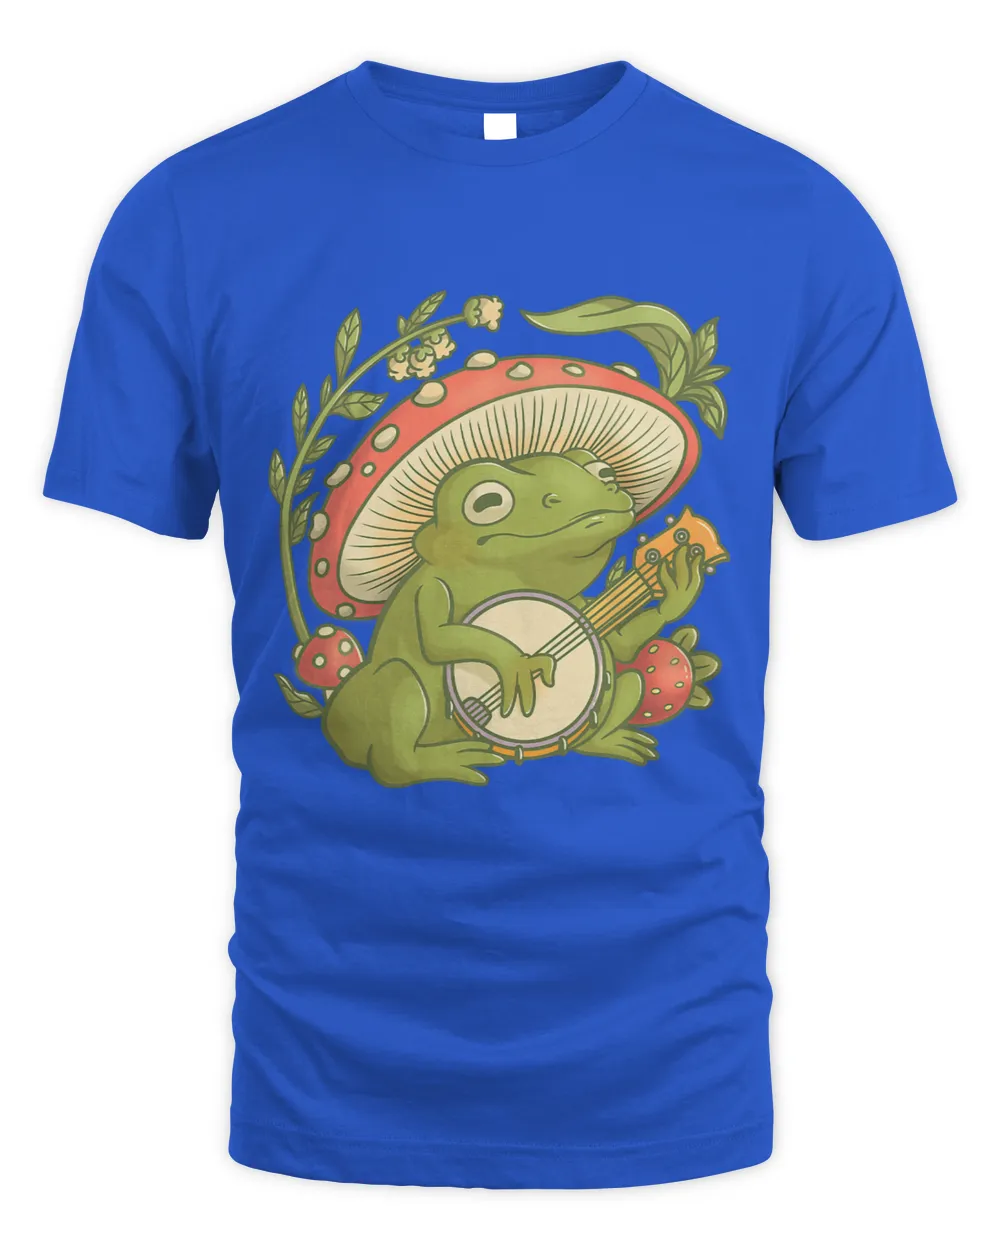 Frogs Cute Cottagecore Aesthetic Frog Playing Banjo on Mushroom4